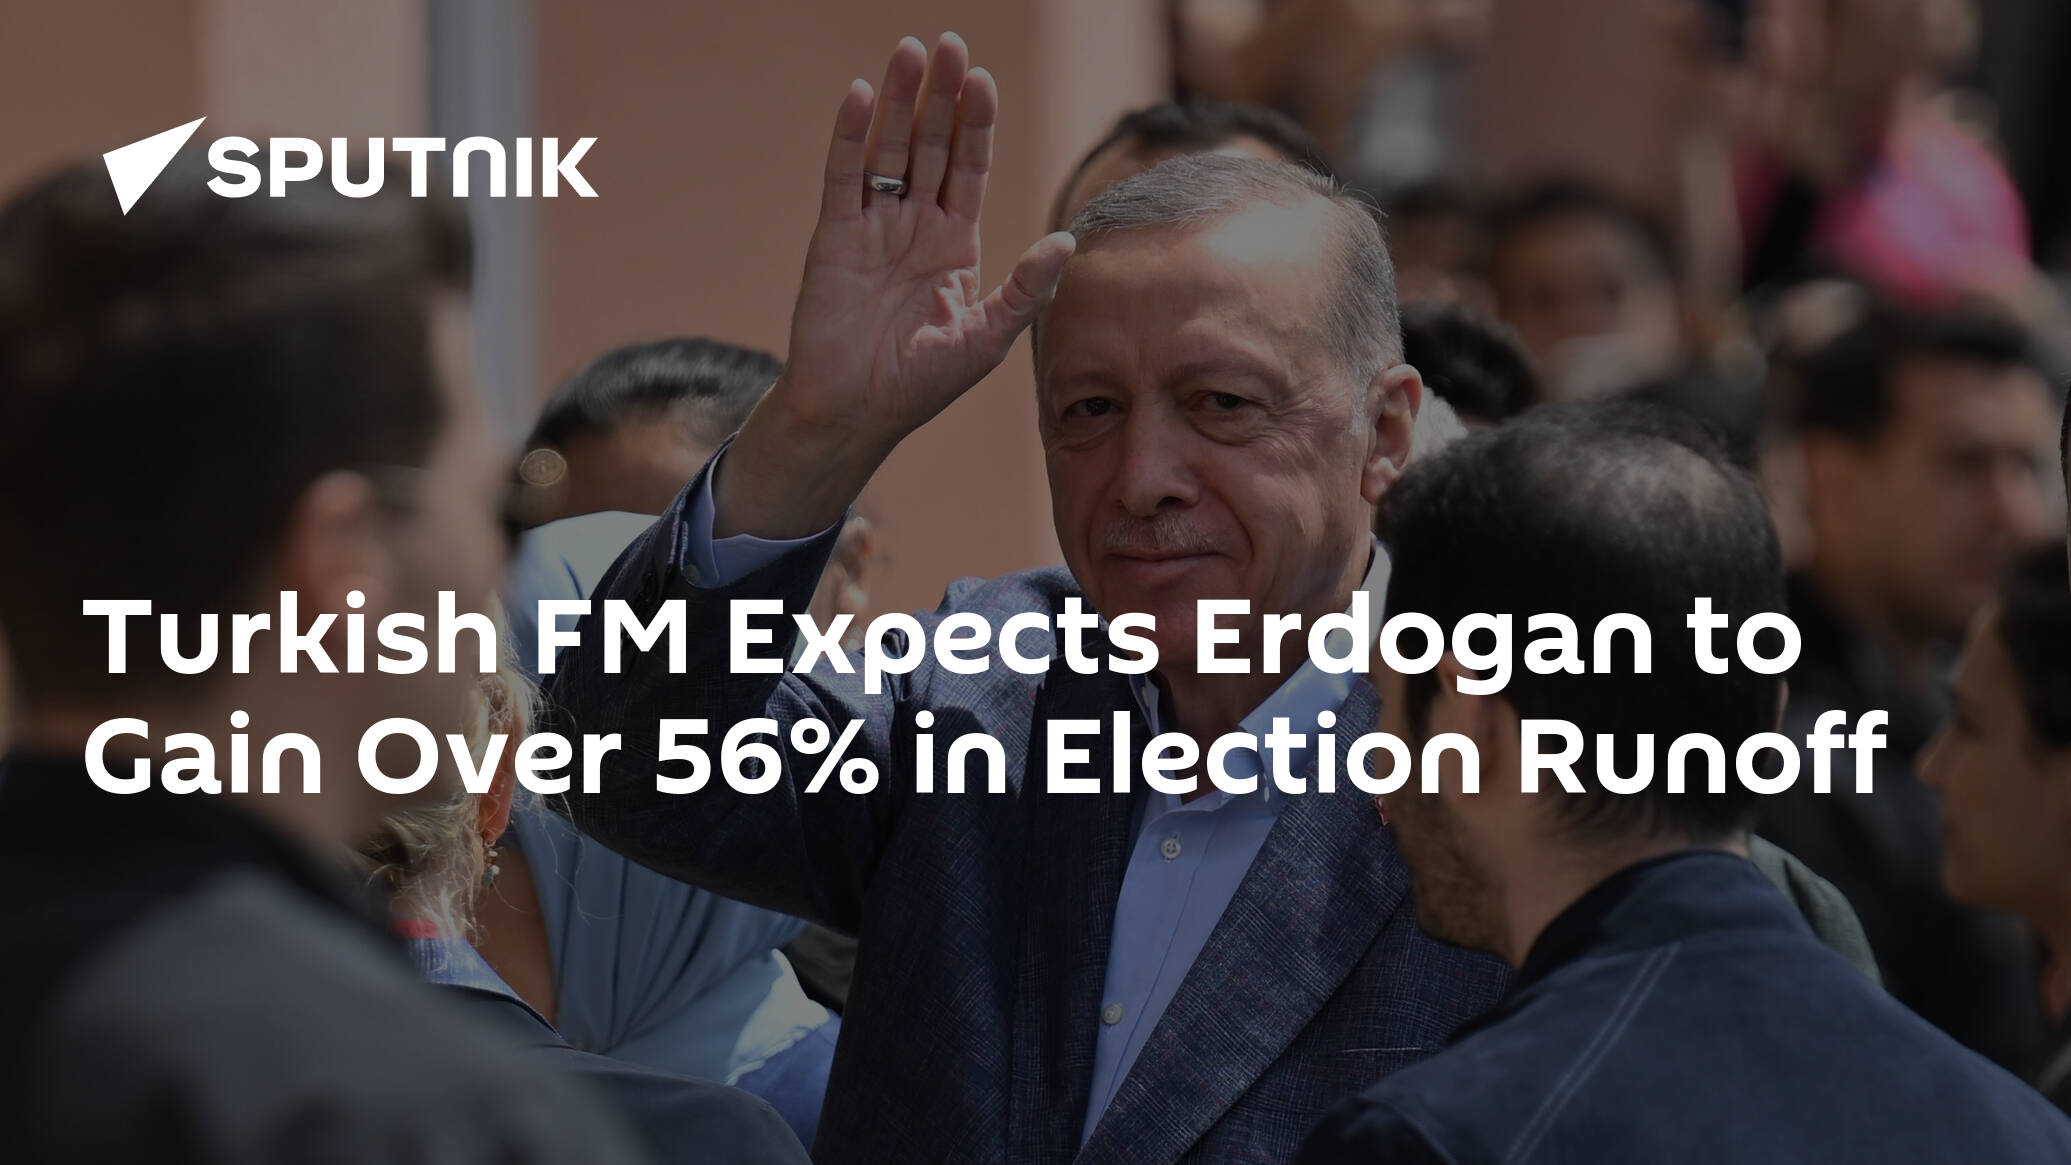 Turkish FM Expects Erdogan to Gain Over 56% in Election Runoff